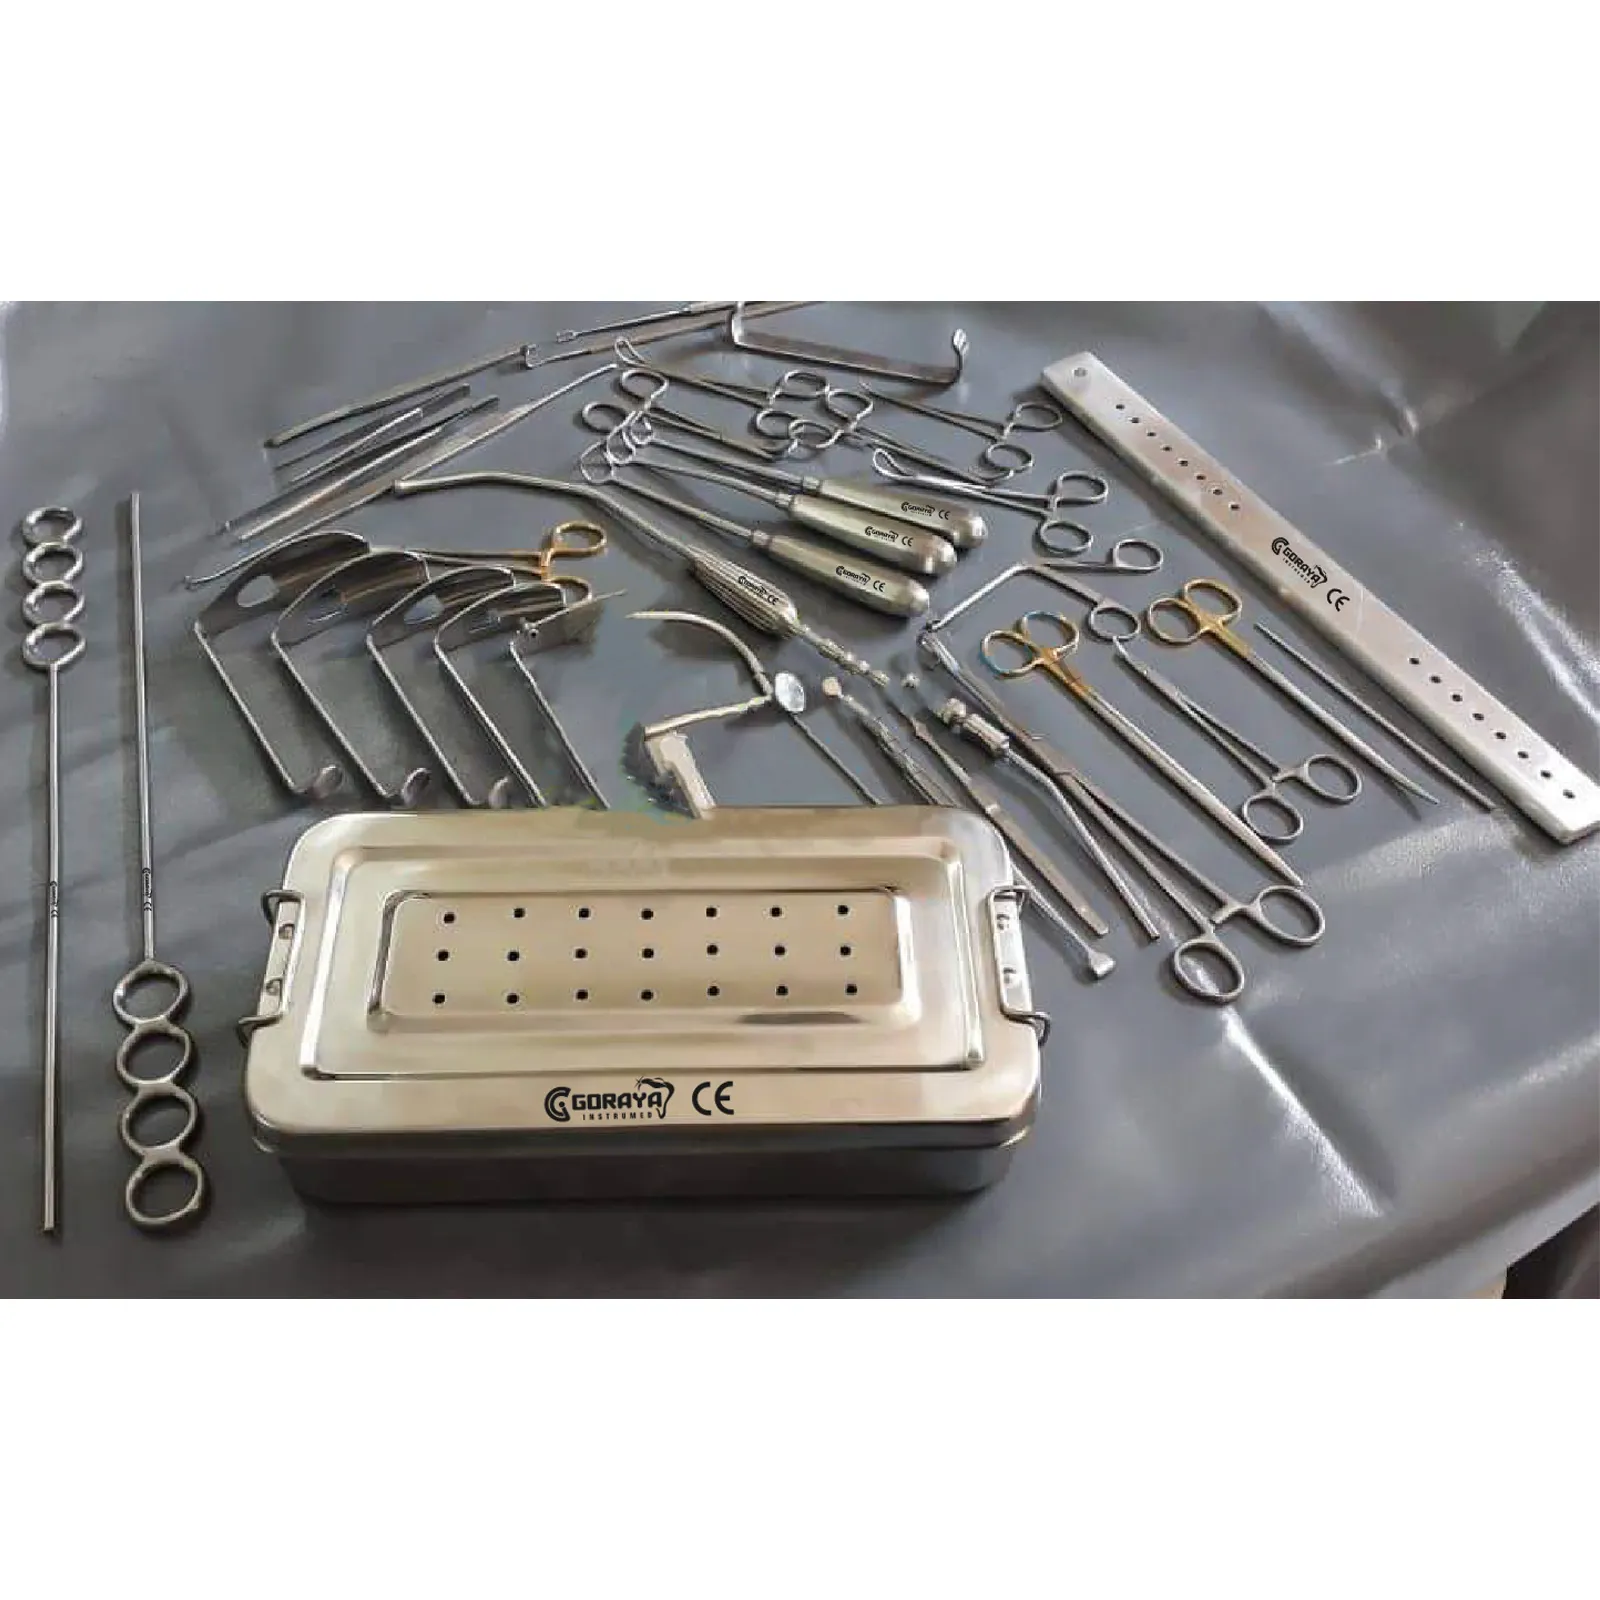 HOT SALE GORAYA GERMAN Tonsillectomy Set of 27 Pieces Surgical Instruments English Quality CE ISO APPROVED